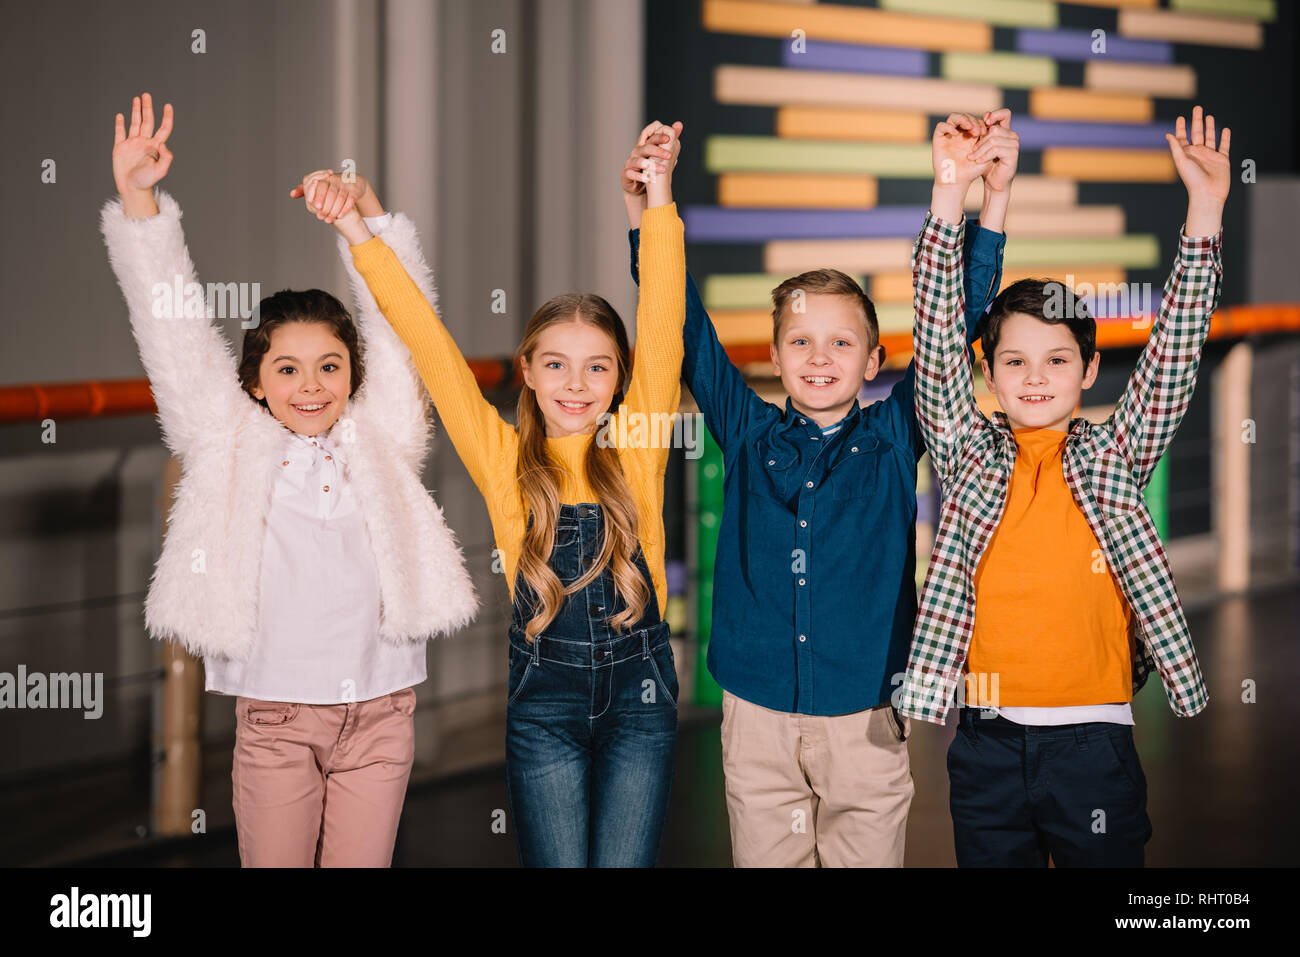 Children raising hands up and expressing happy emotions Stock Photo